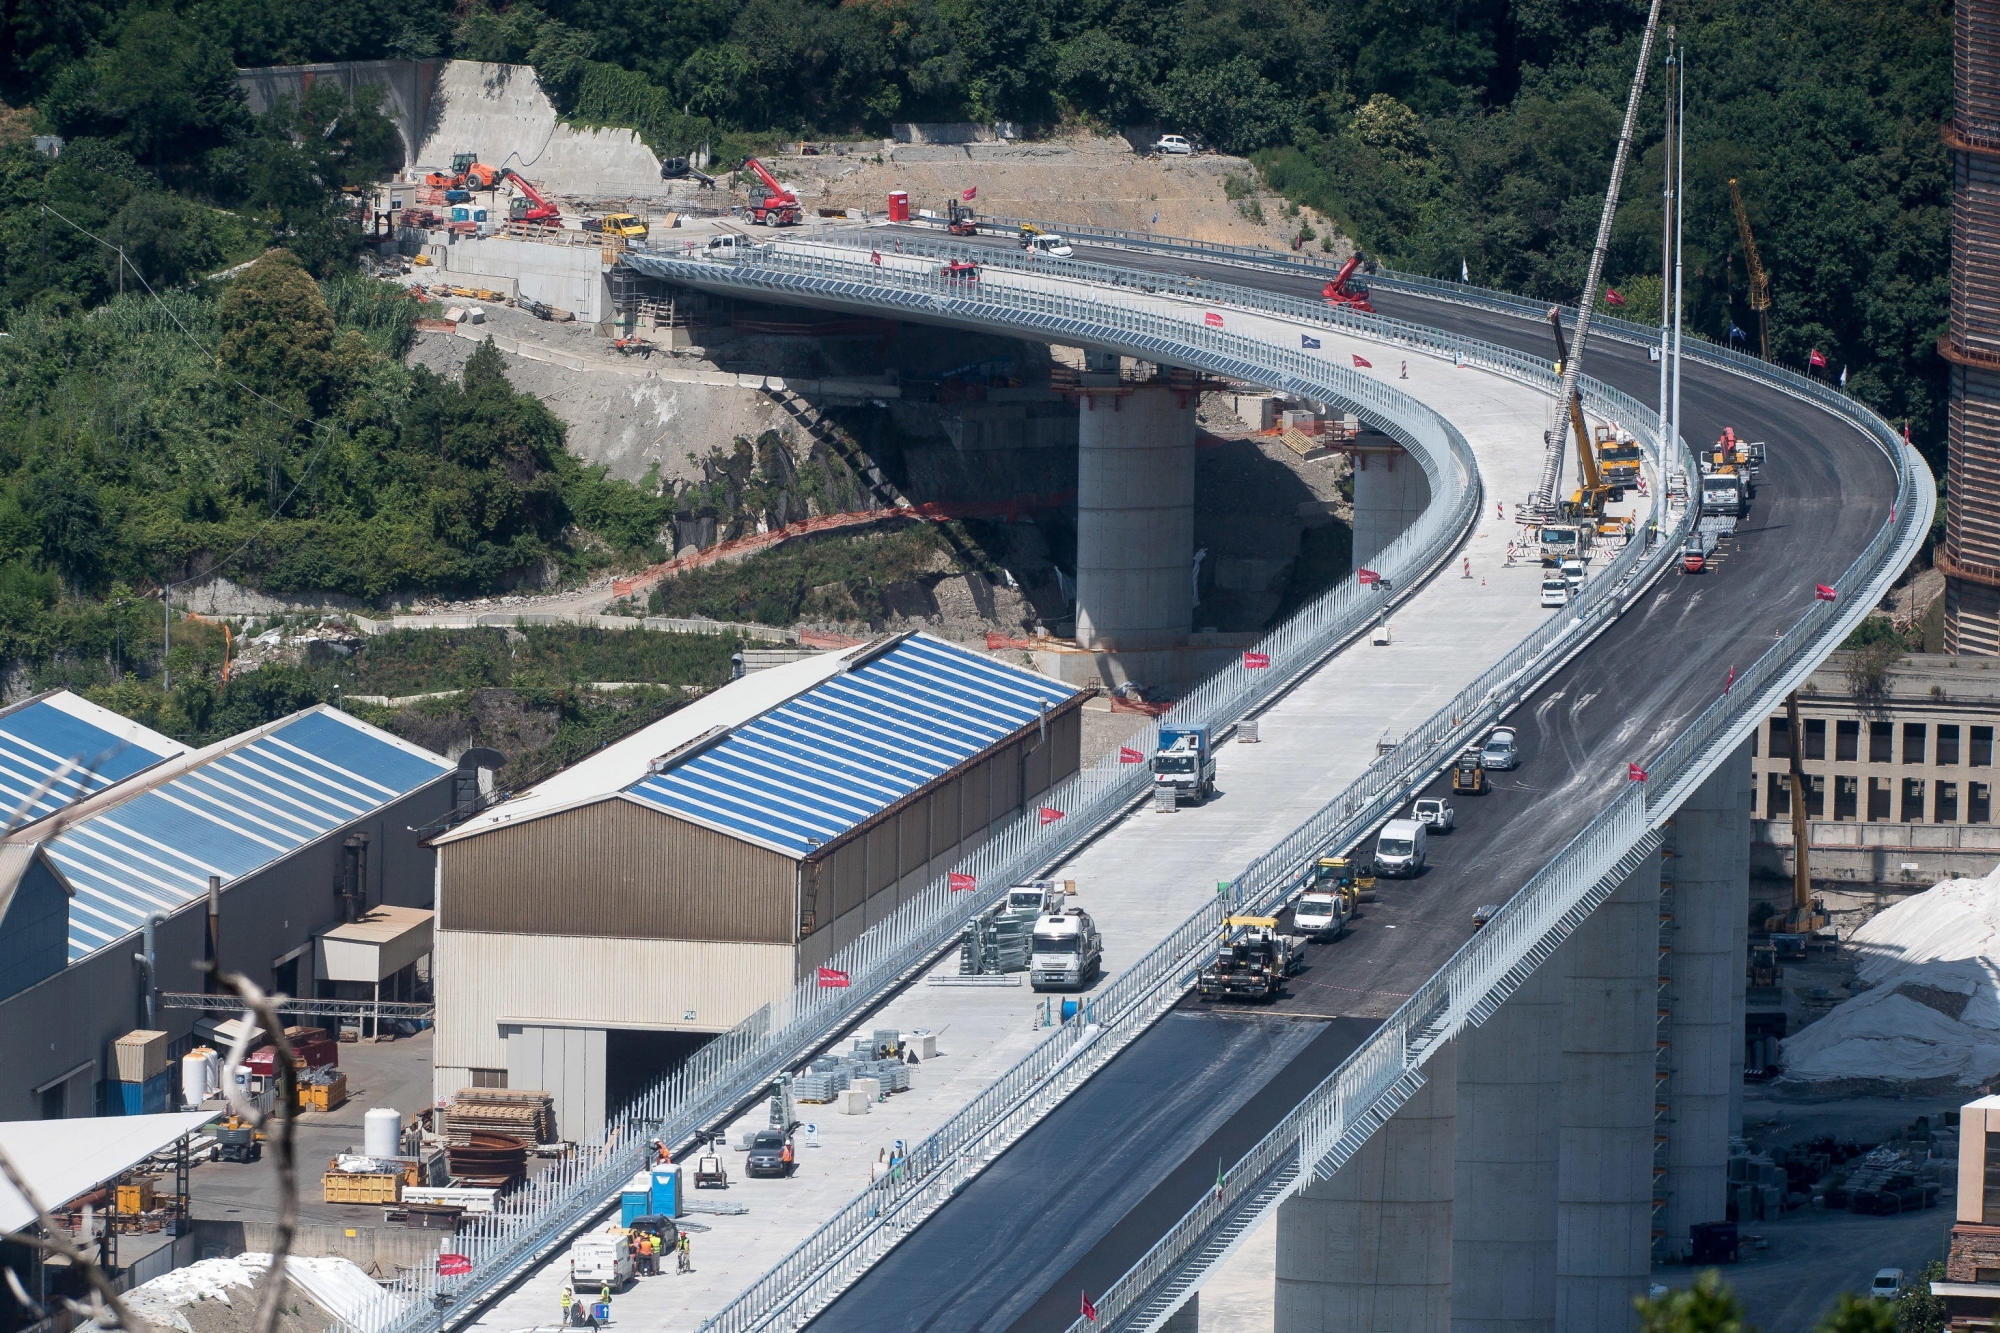 epa08536561 A view of the new Genoa motorway bridge construction site, in Genoa, Italy, 09 July 2020.The new bridge is under construction after the Morandi highway bridge partially collapsed on 14 August 2018, killing a total of 43 people.  EPA/LUCA ZENNARO
ArcInfo